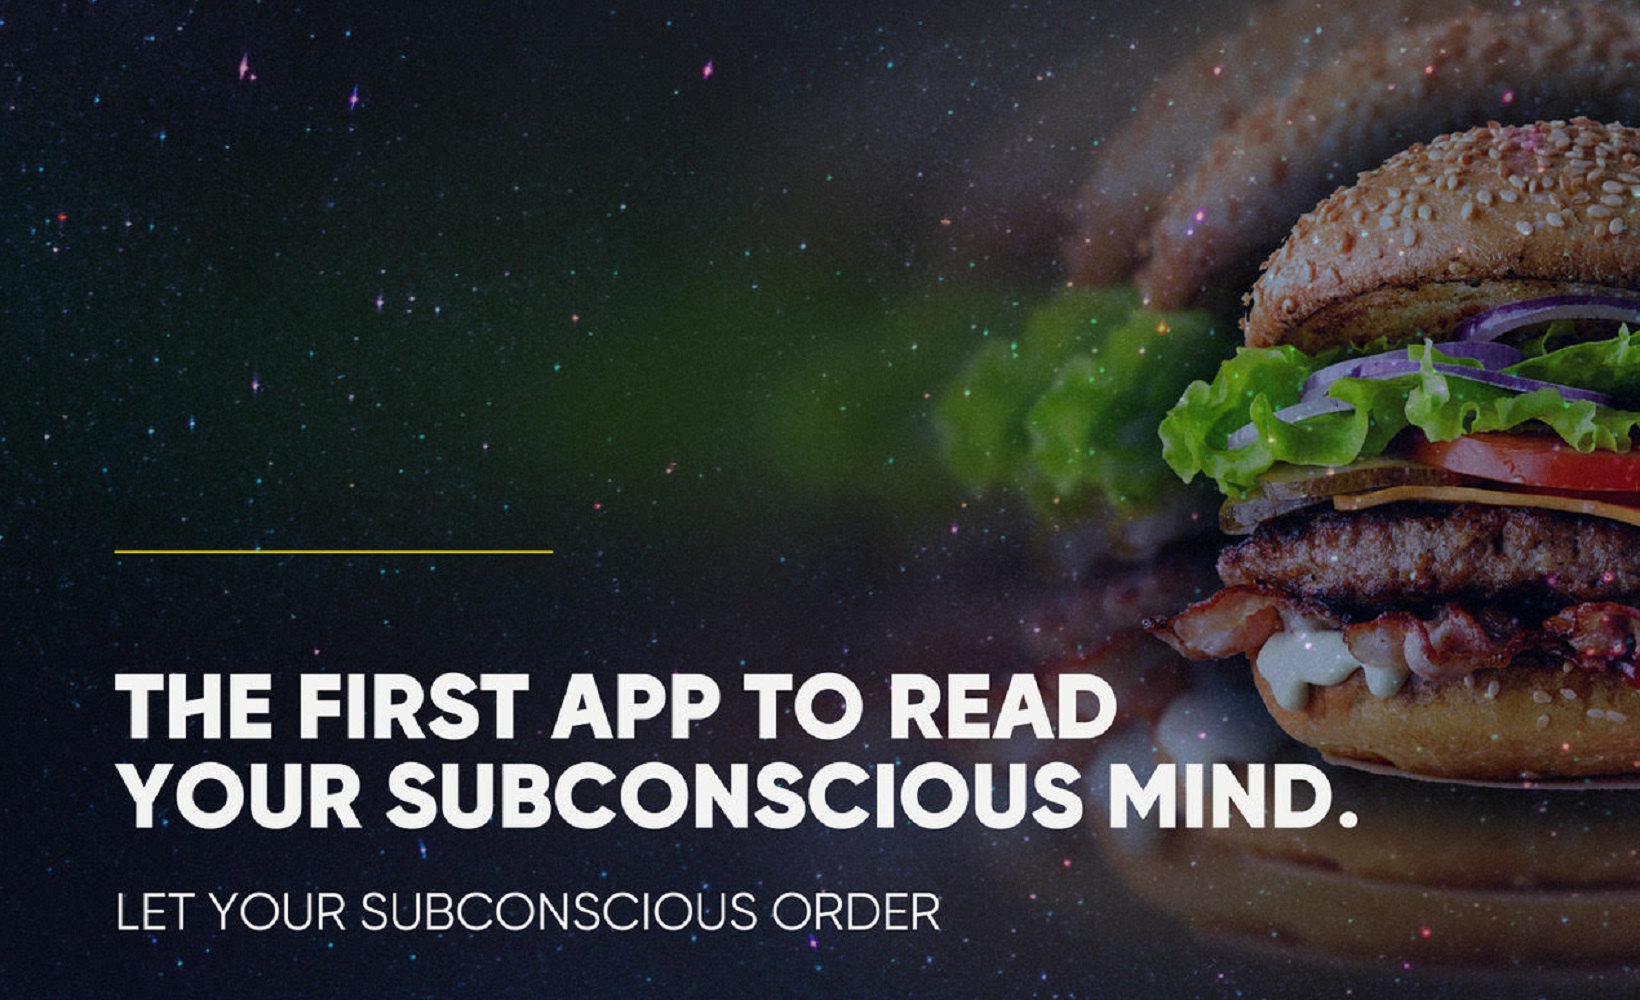 HungerStation and Wunderman Thompson Tap into the Subconscious to Help People Order Food